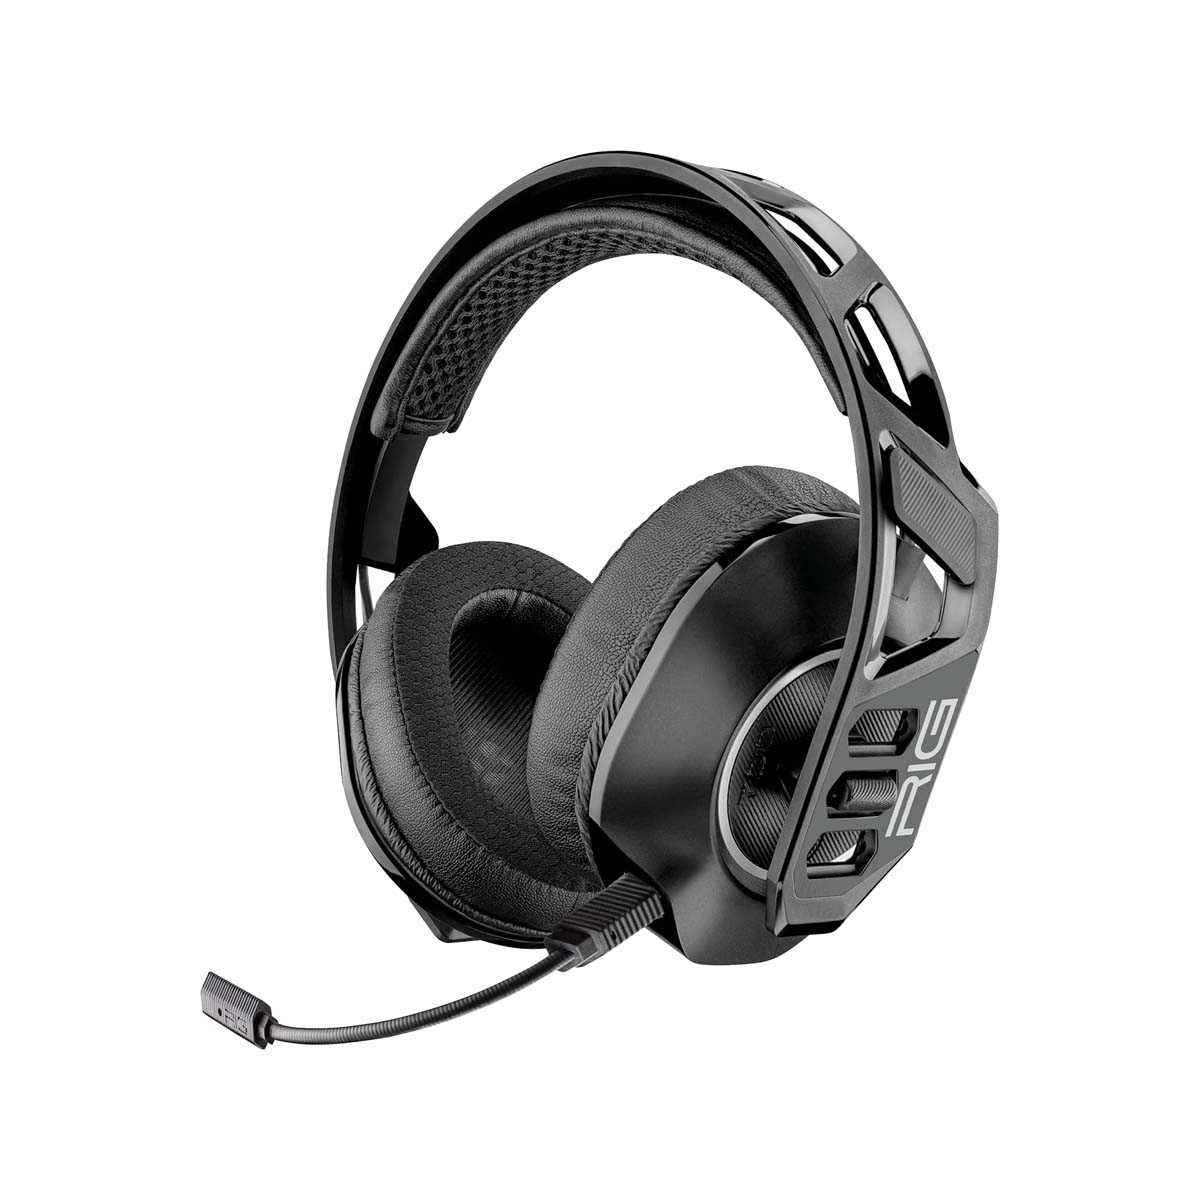 D RIG ARTIC 700 HS Headphone for Games